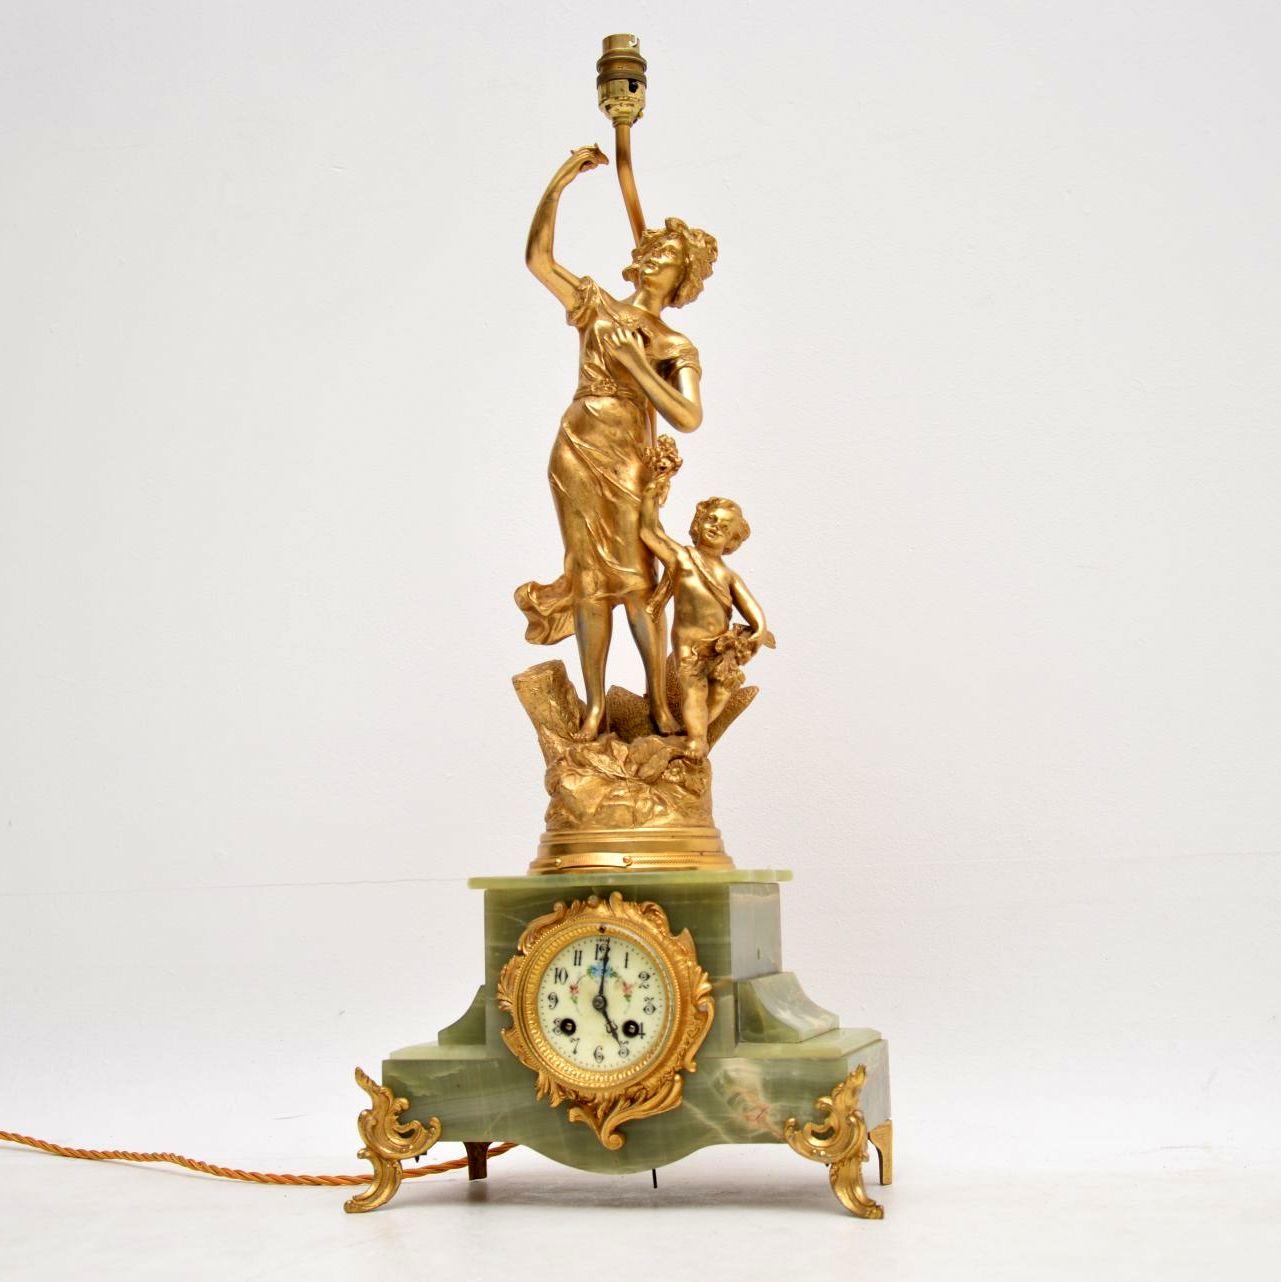 Very decorative large antique French mantle clock encased in onyx, with lots of gilt metal decoration & sitting on gilded feet. On top of the clock section is a very detailed classical gilt metal figure of a woman & a child. This item has also been